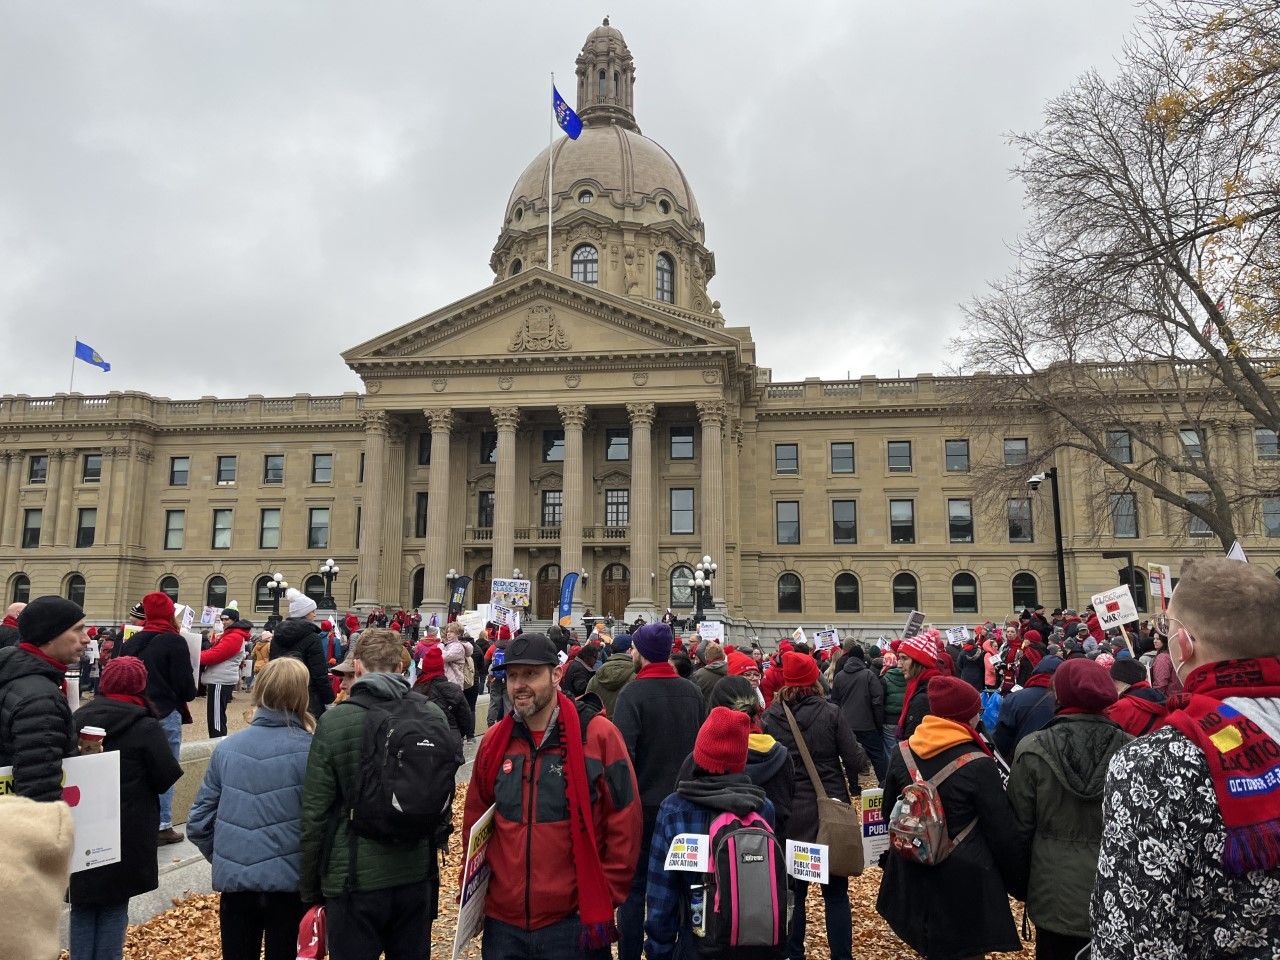 Stand for public education': Albertans pack legislature grounds for rally